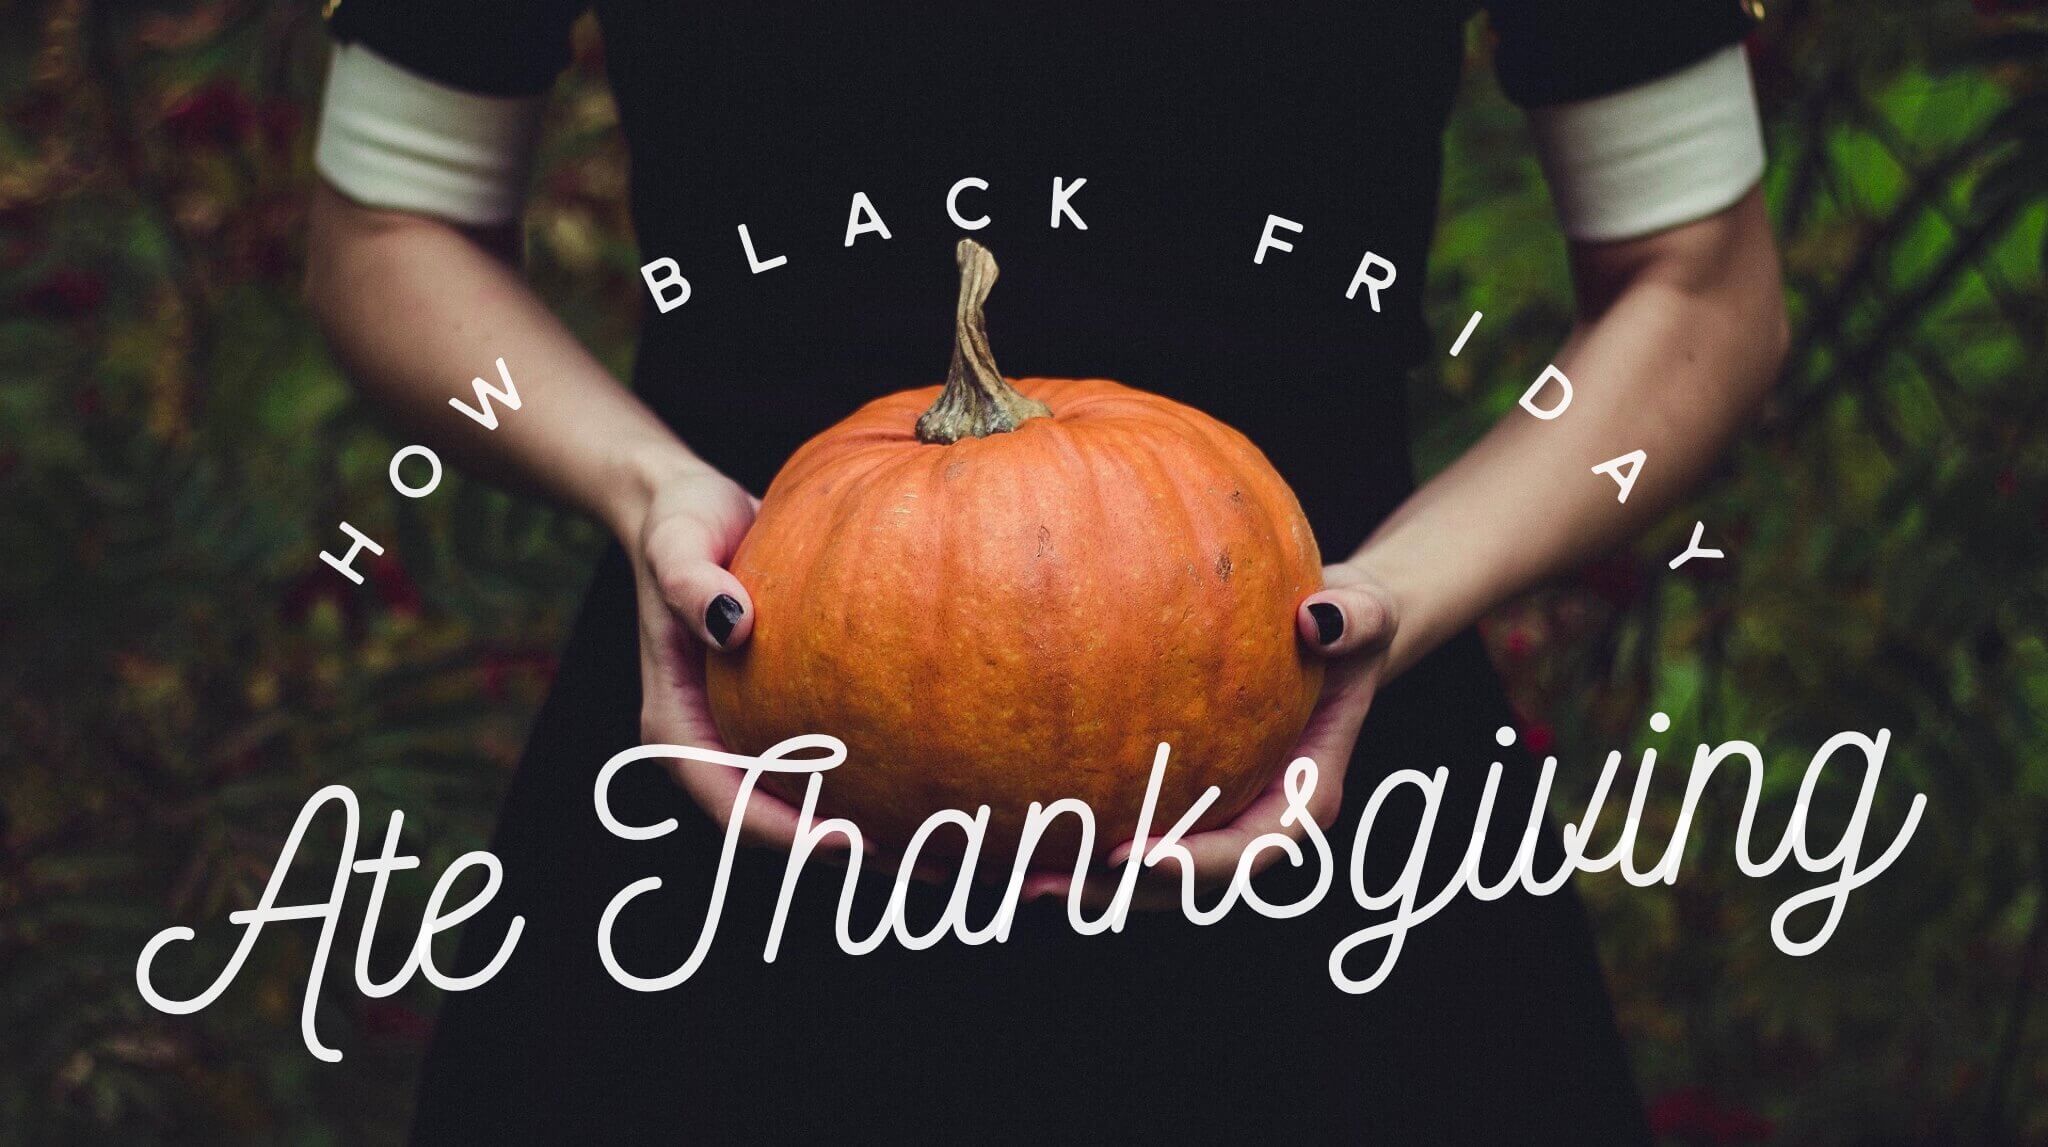 How Black Friday Ate Thanksgiving - Pro Preacher